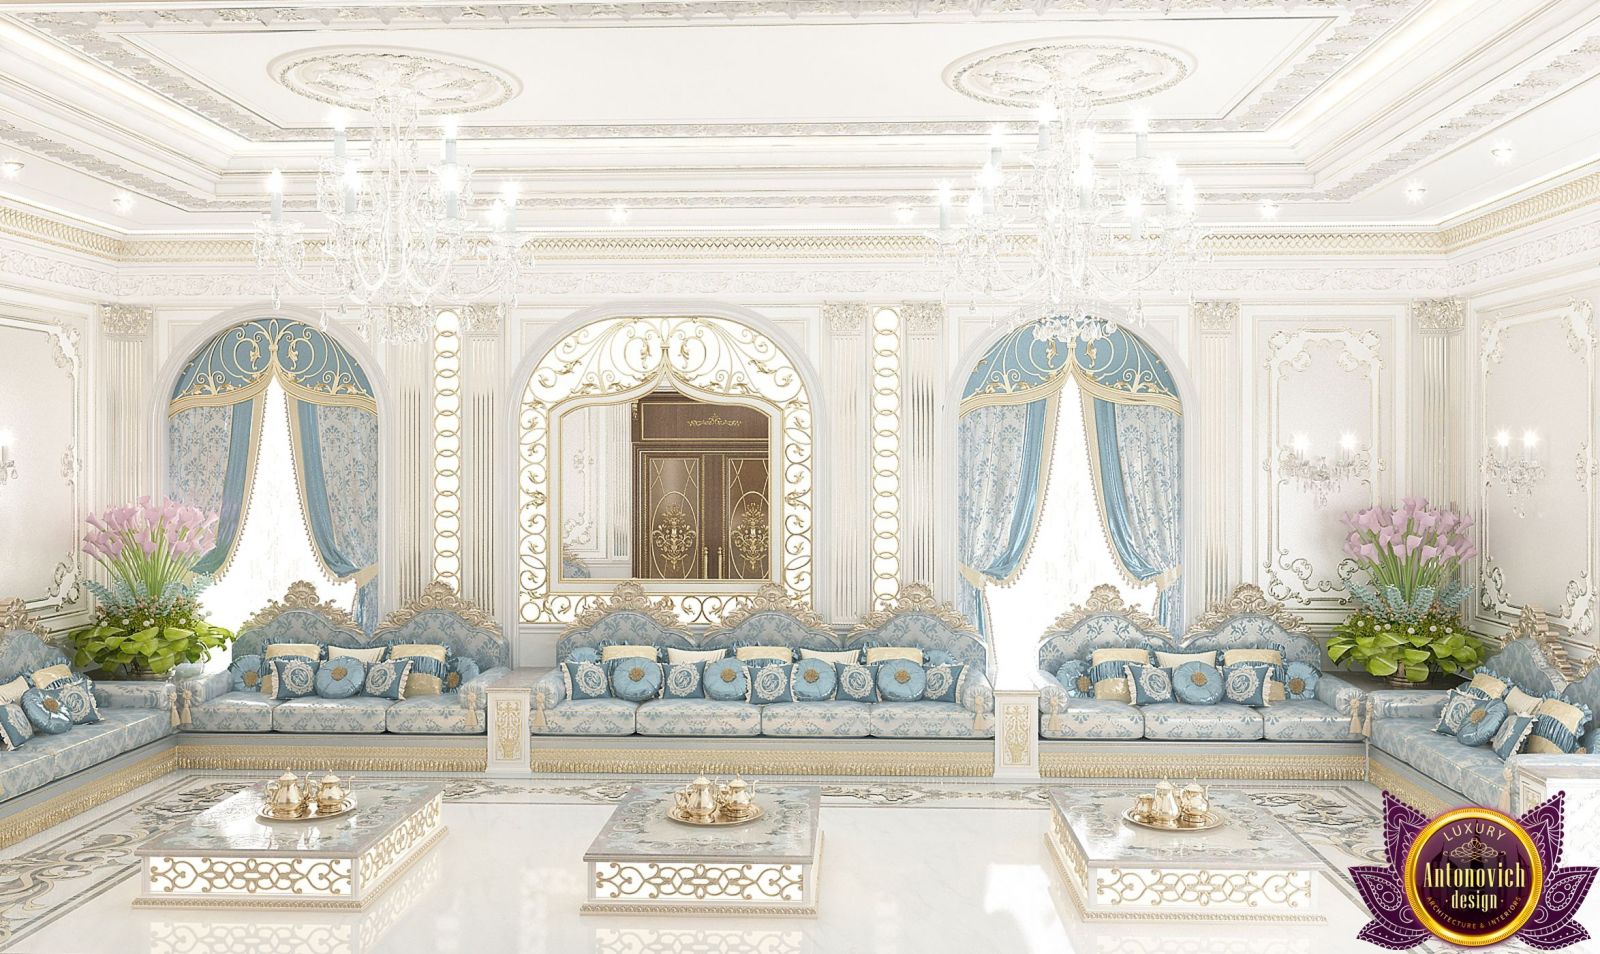 Minimalist Majlis design with a touch of sophistication